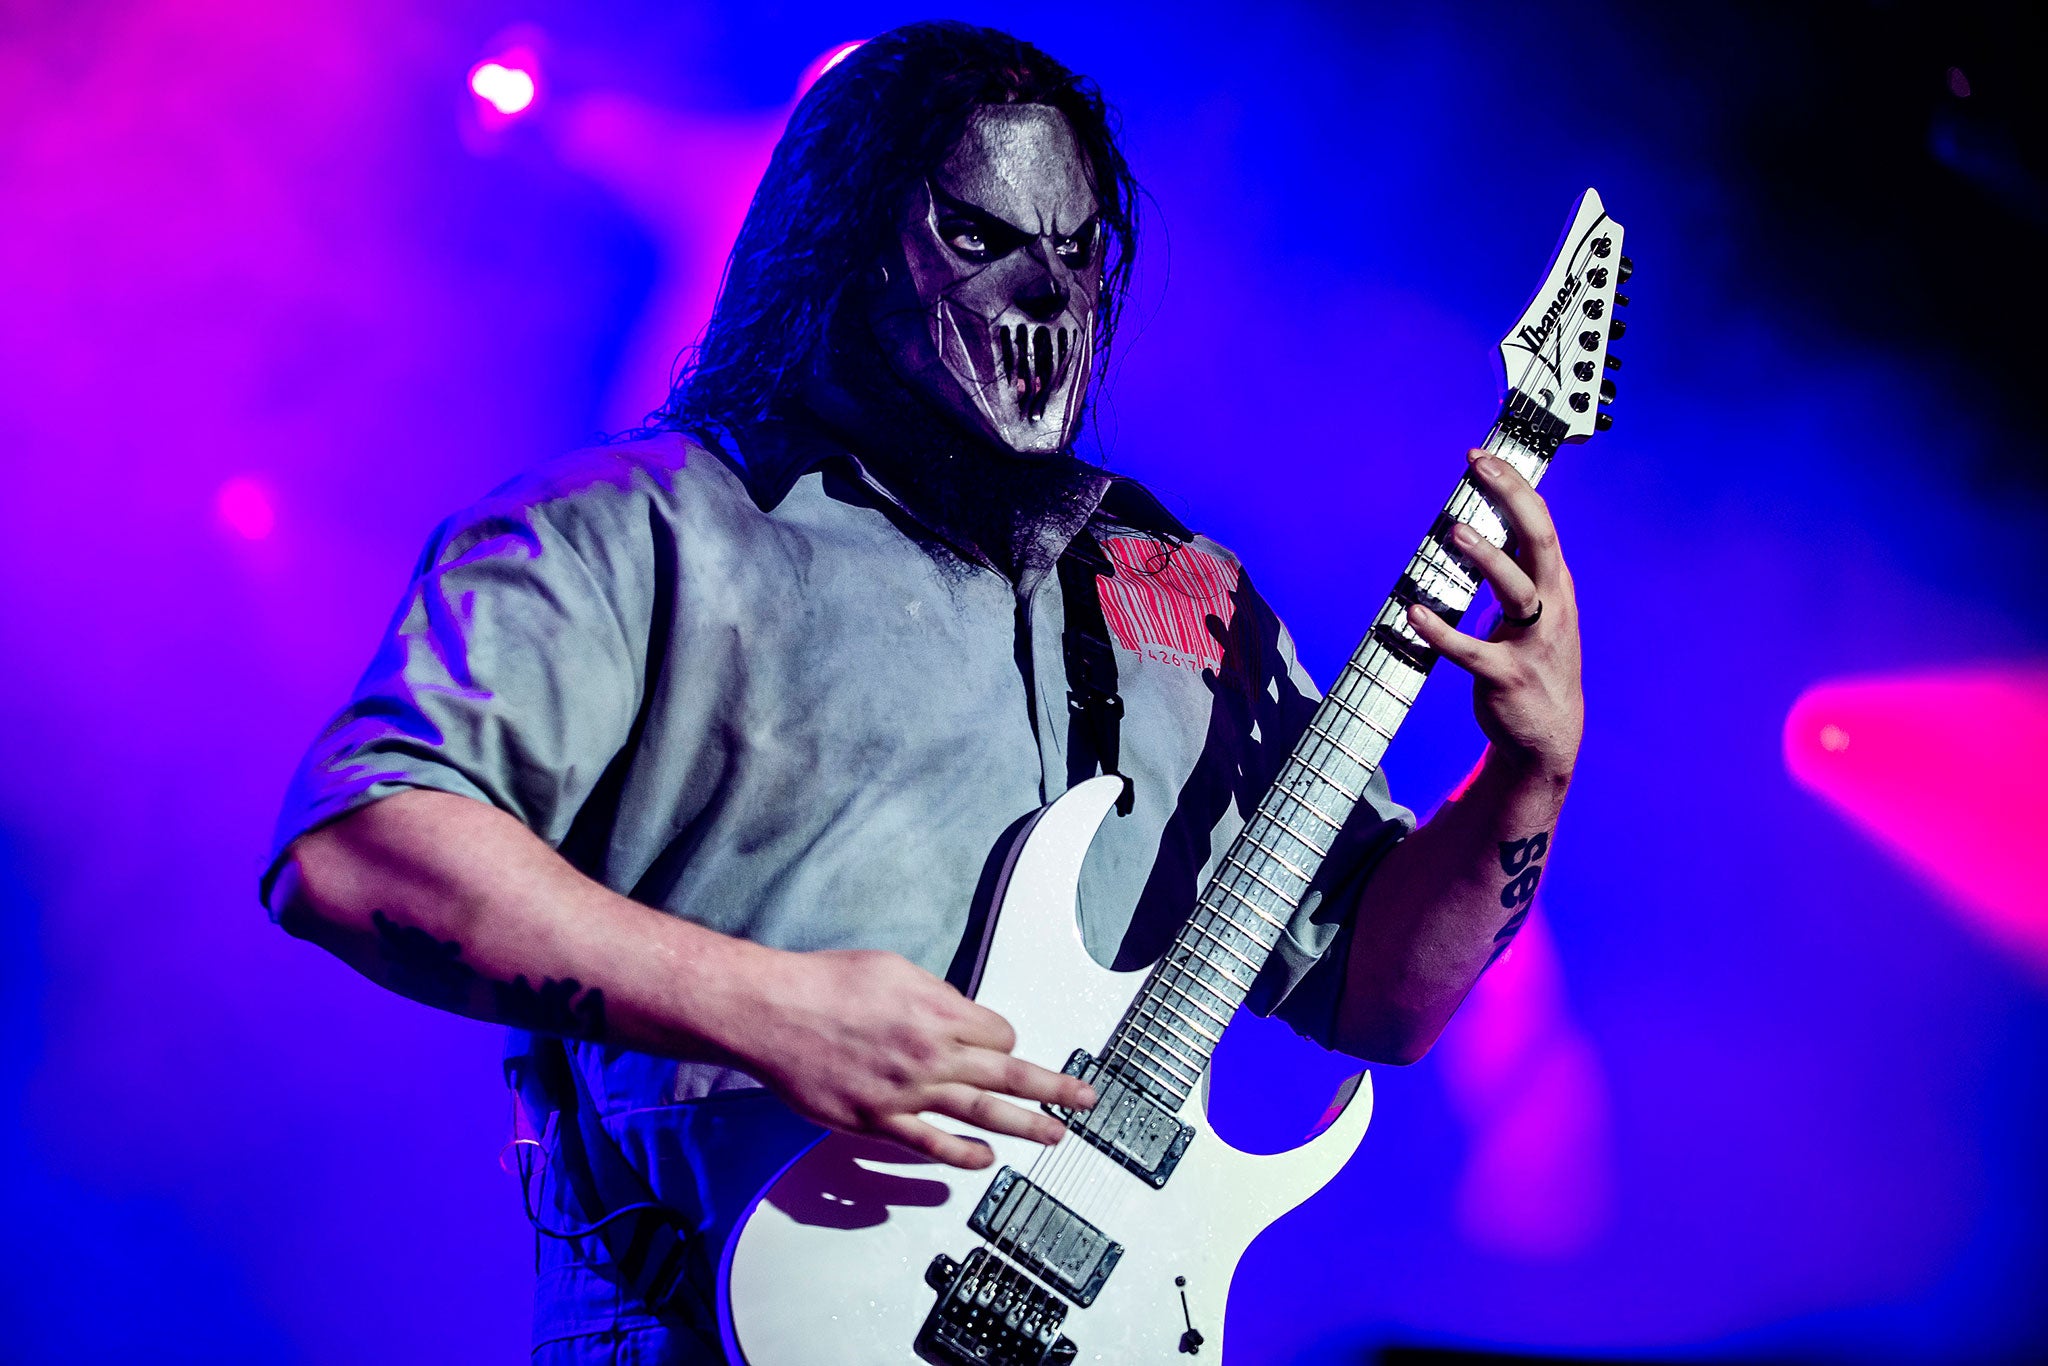 Slipknot's Mick Thomson suffered stab wounds to the back of the head